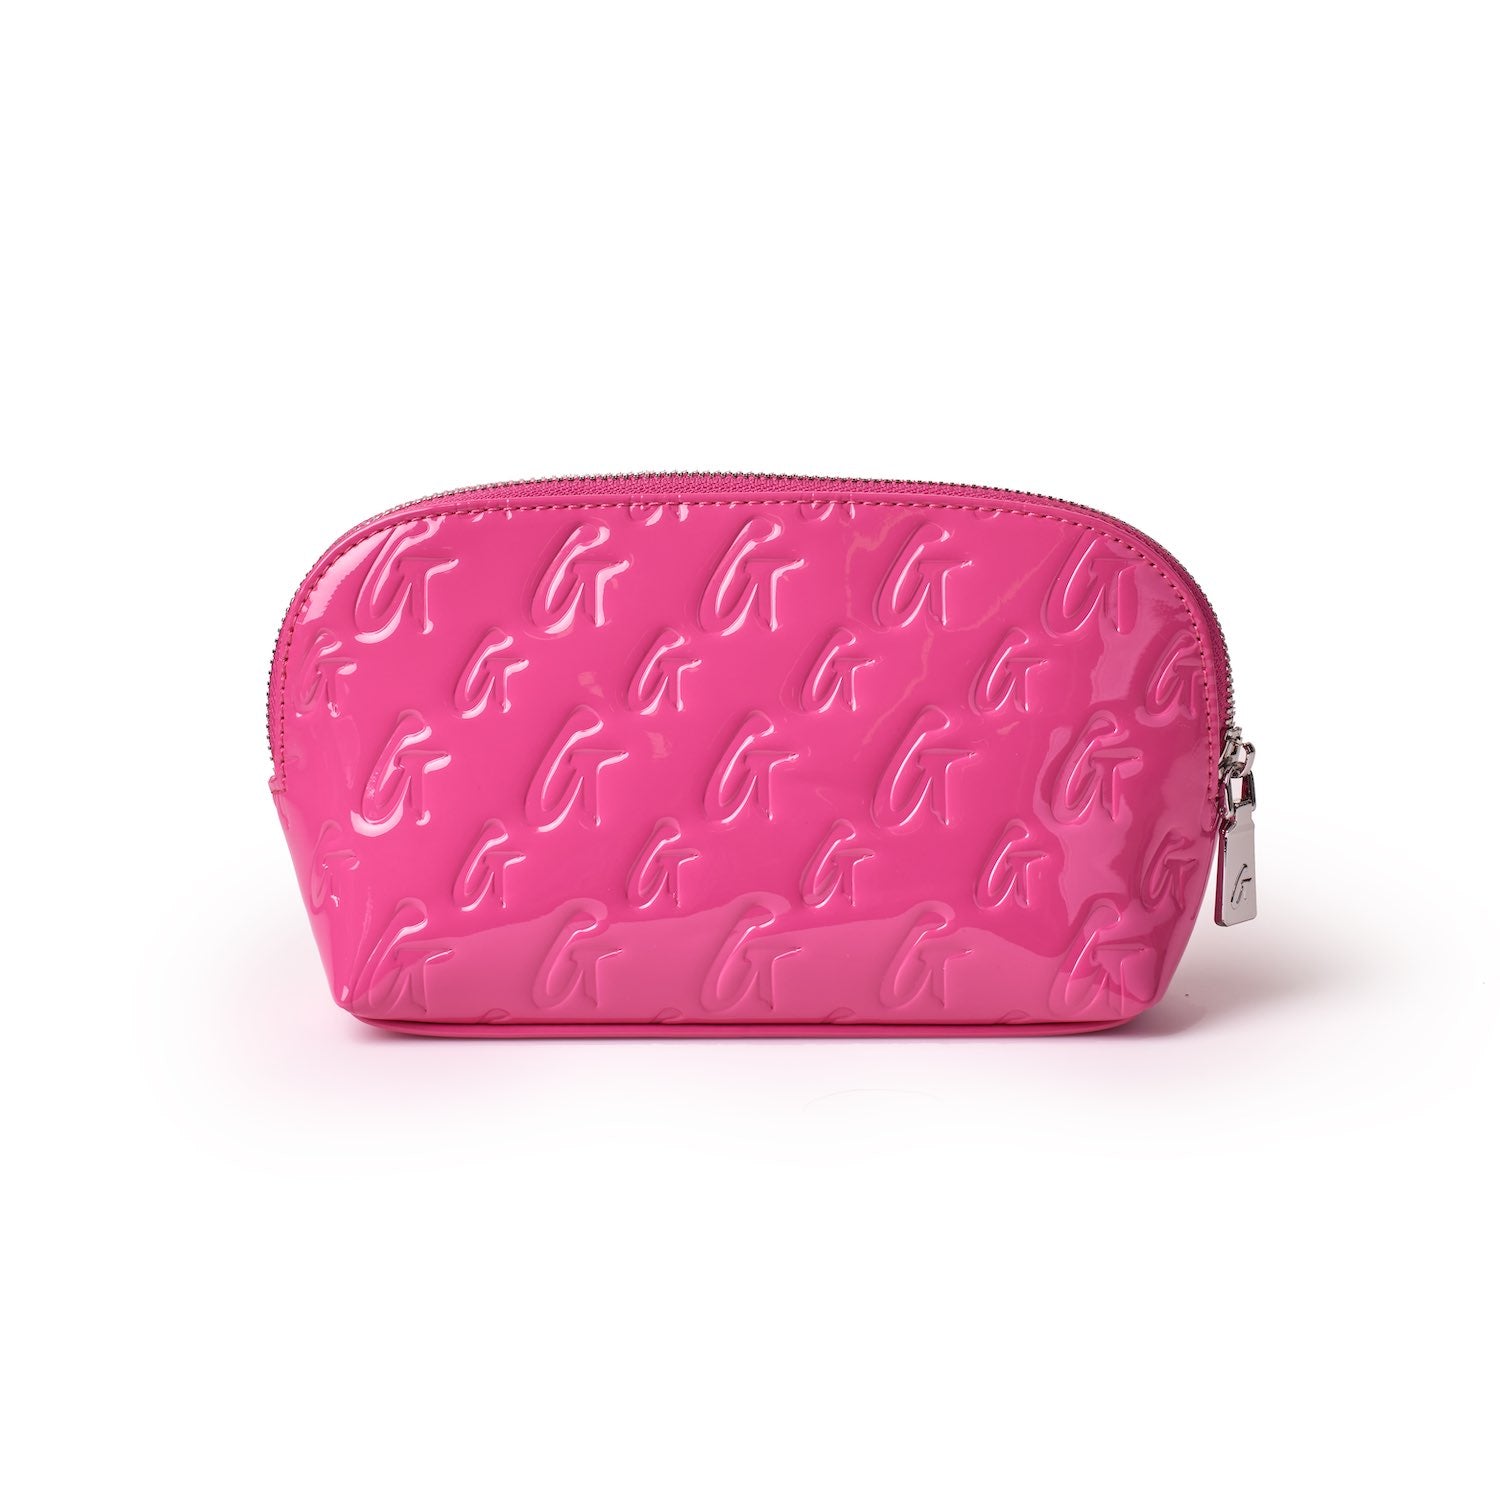 MONOGRAM COSMETIC POUCH MIRROR HOT PINK